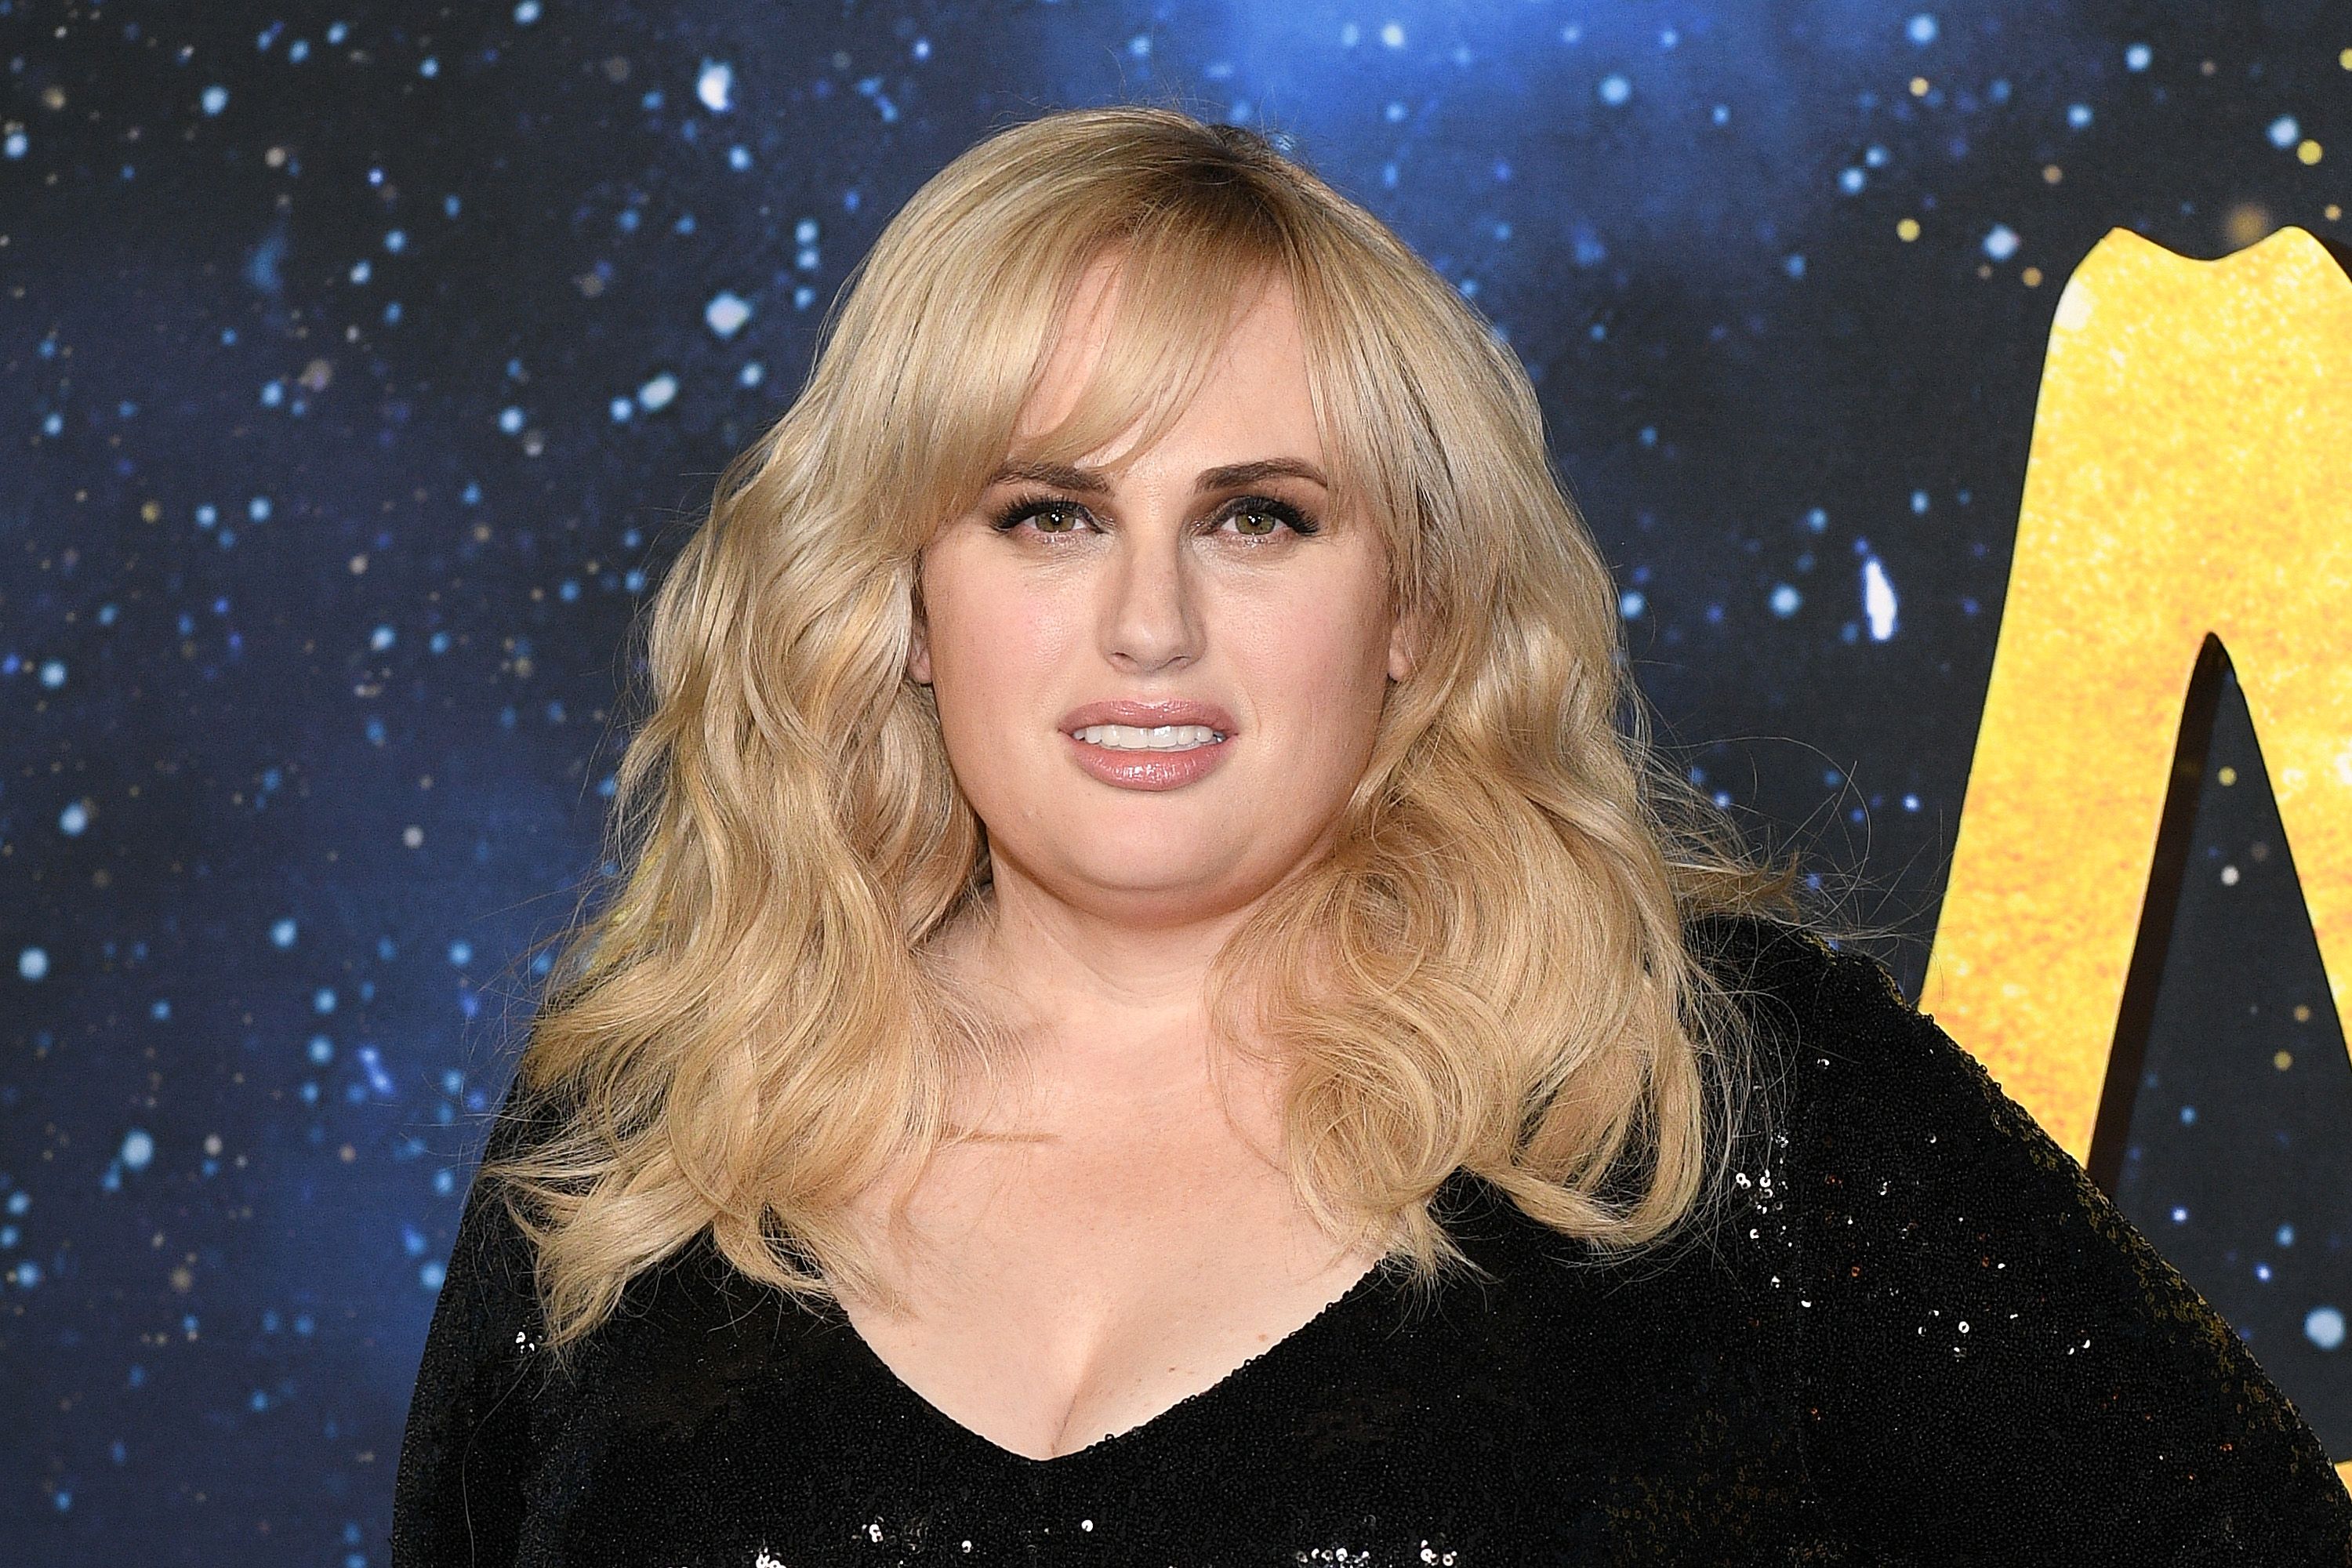 Rebel Wilson at the world premiere of "Cats" at Alice Tully Hall, Lincoln Center on December 16, 2019 | Photo: Getty Images